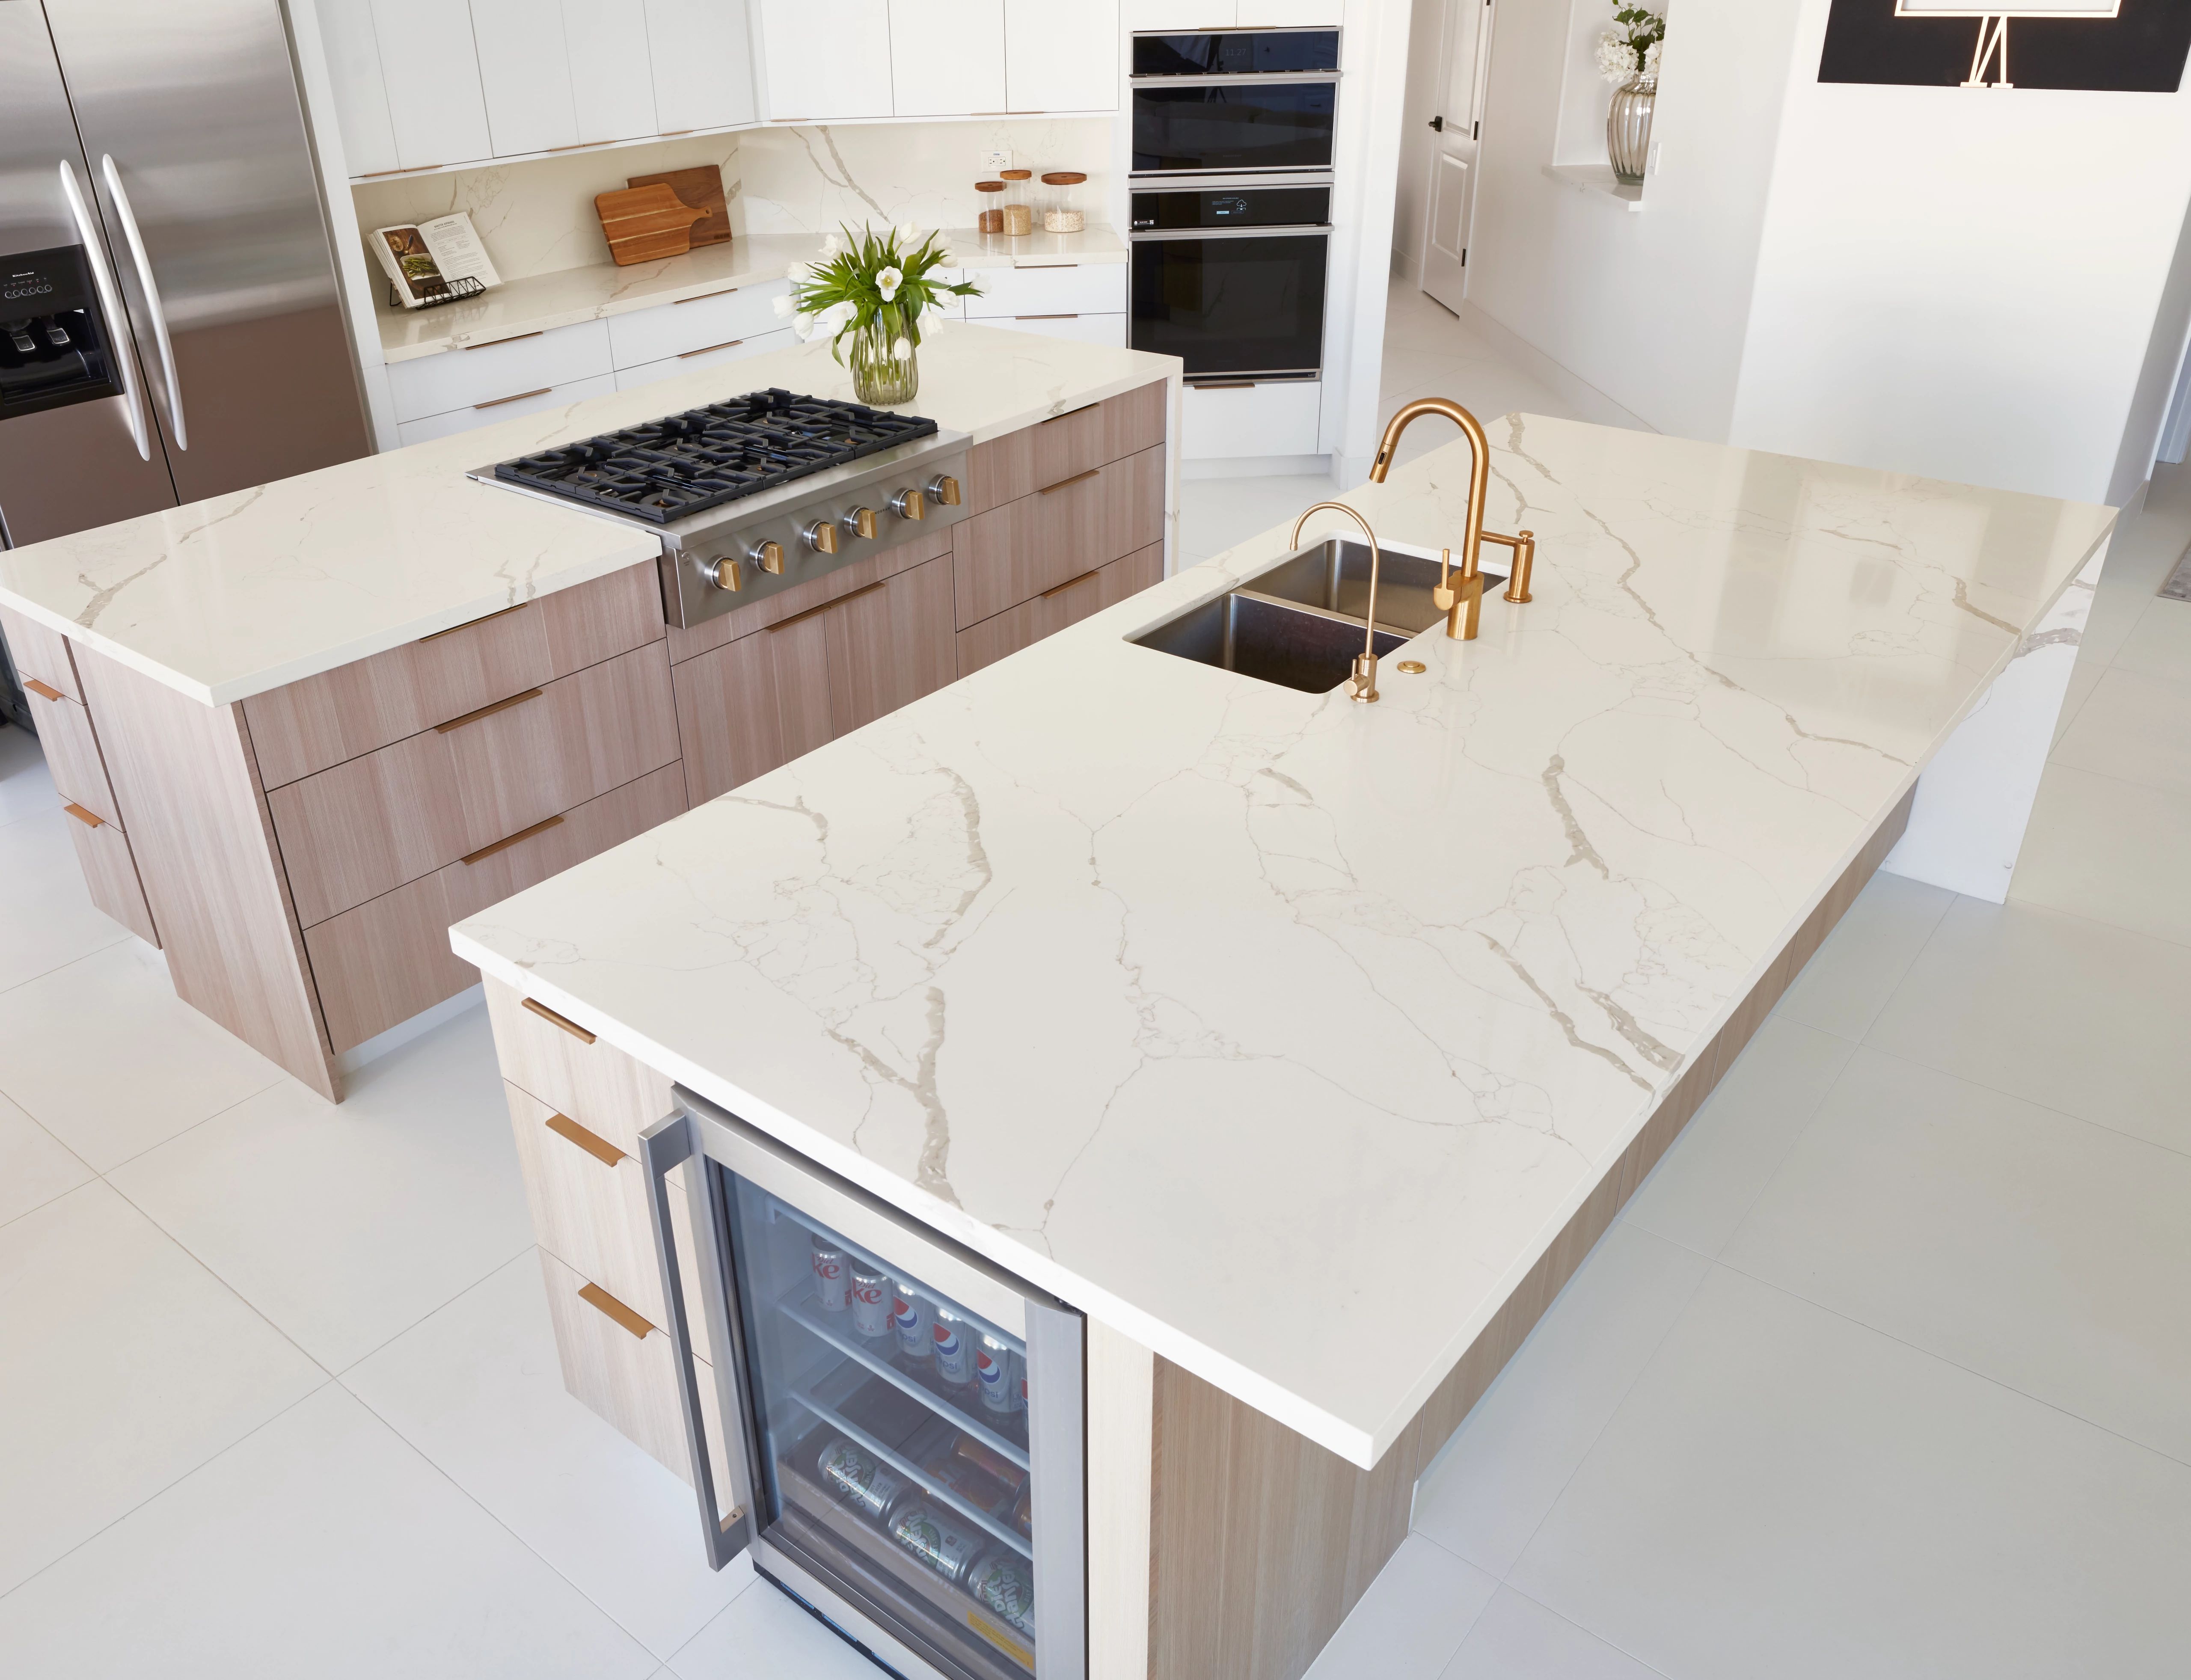 Calacatta Capella is classic white quartz with grey, marble-like veining strewn throughout. This dramatic detail gives the material the look of natural stone and adds character to its clean and simple backdrop.